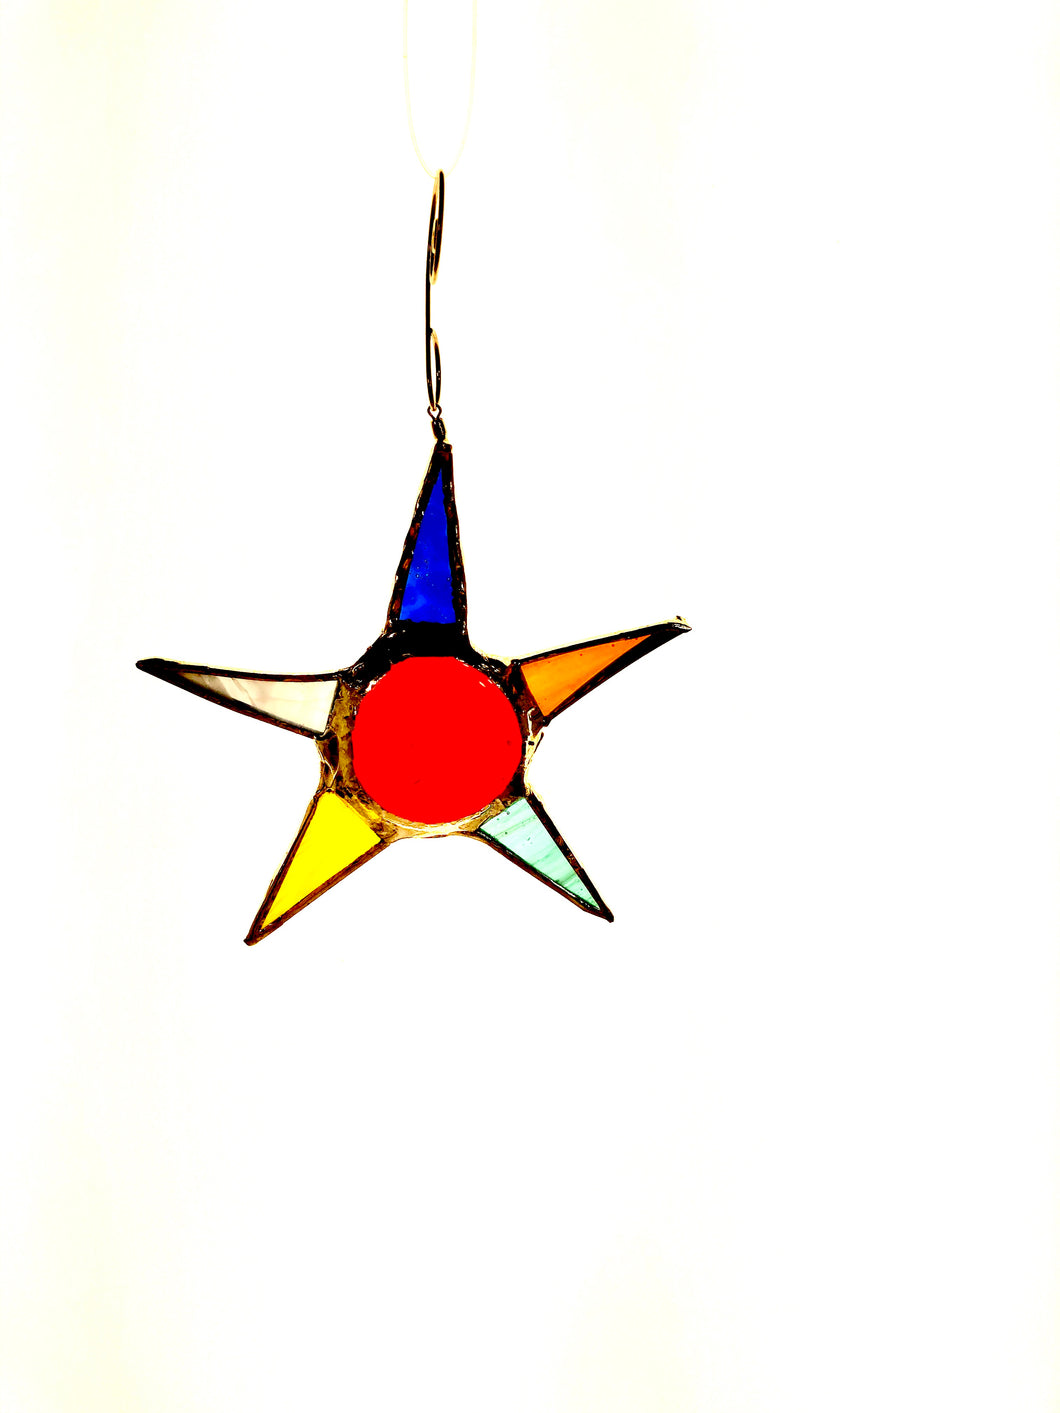 Multi-Colored Star with Orange Middle